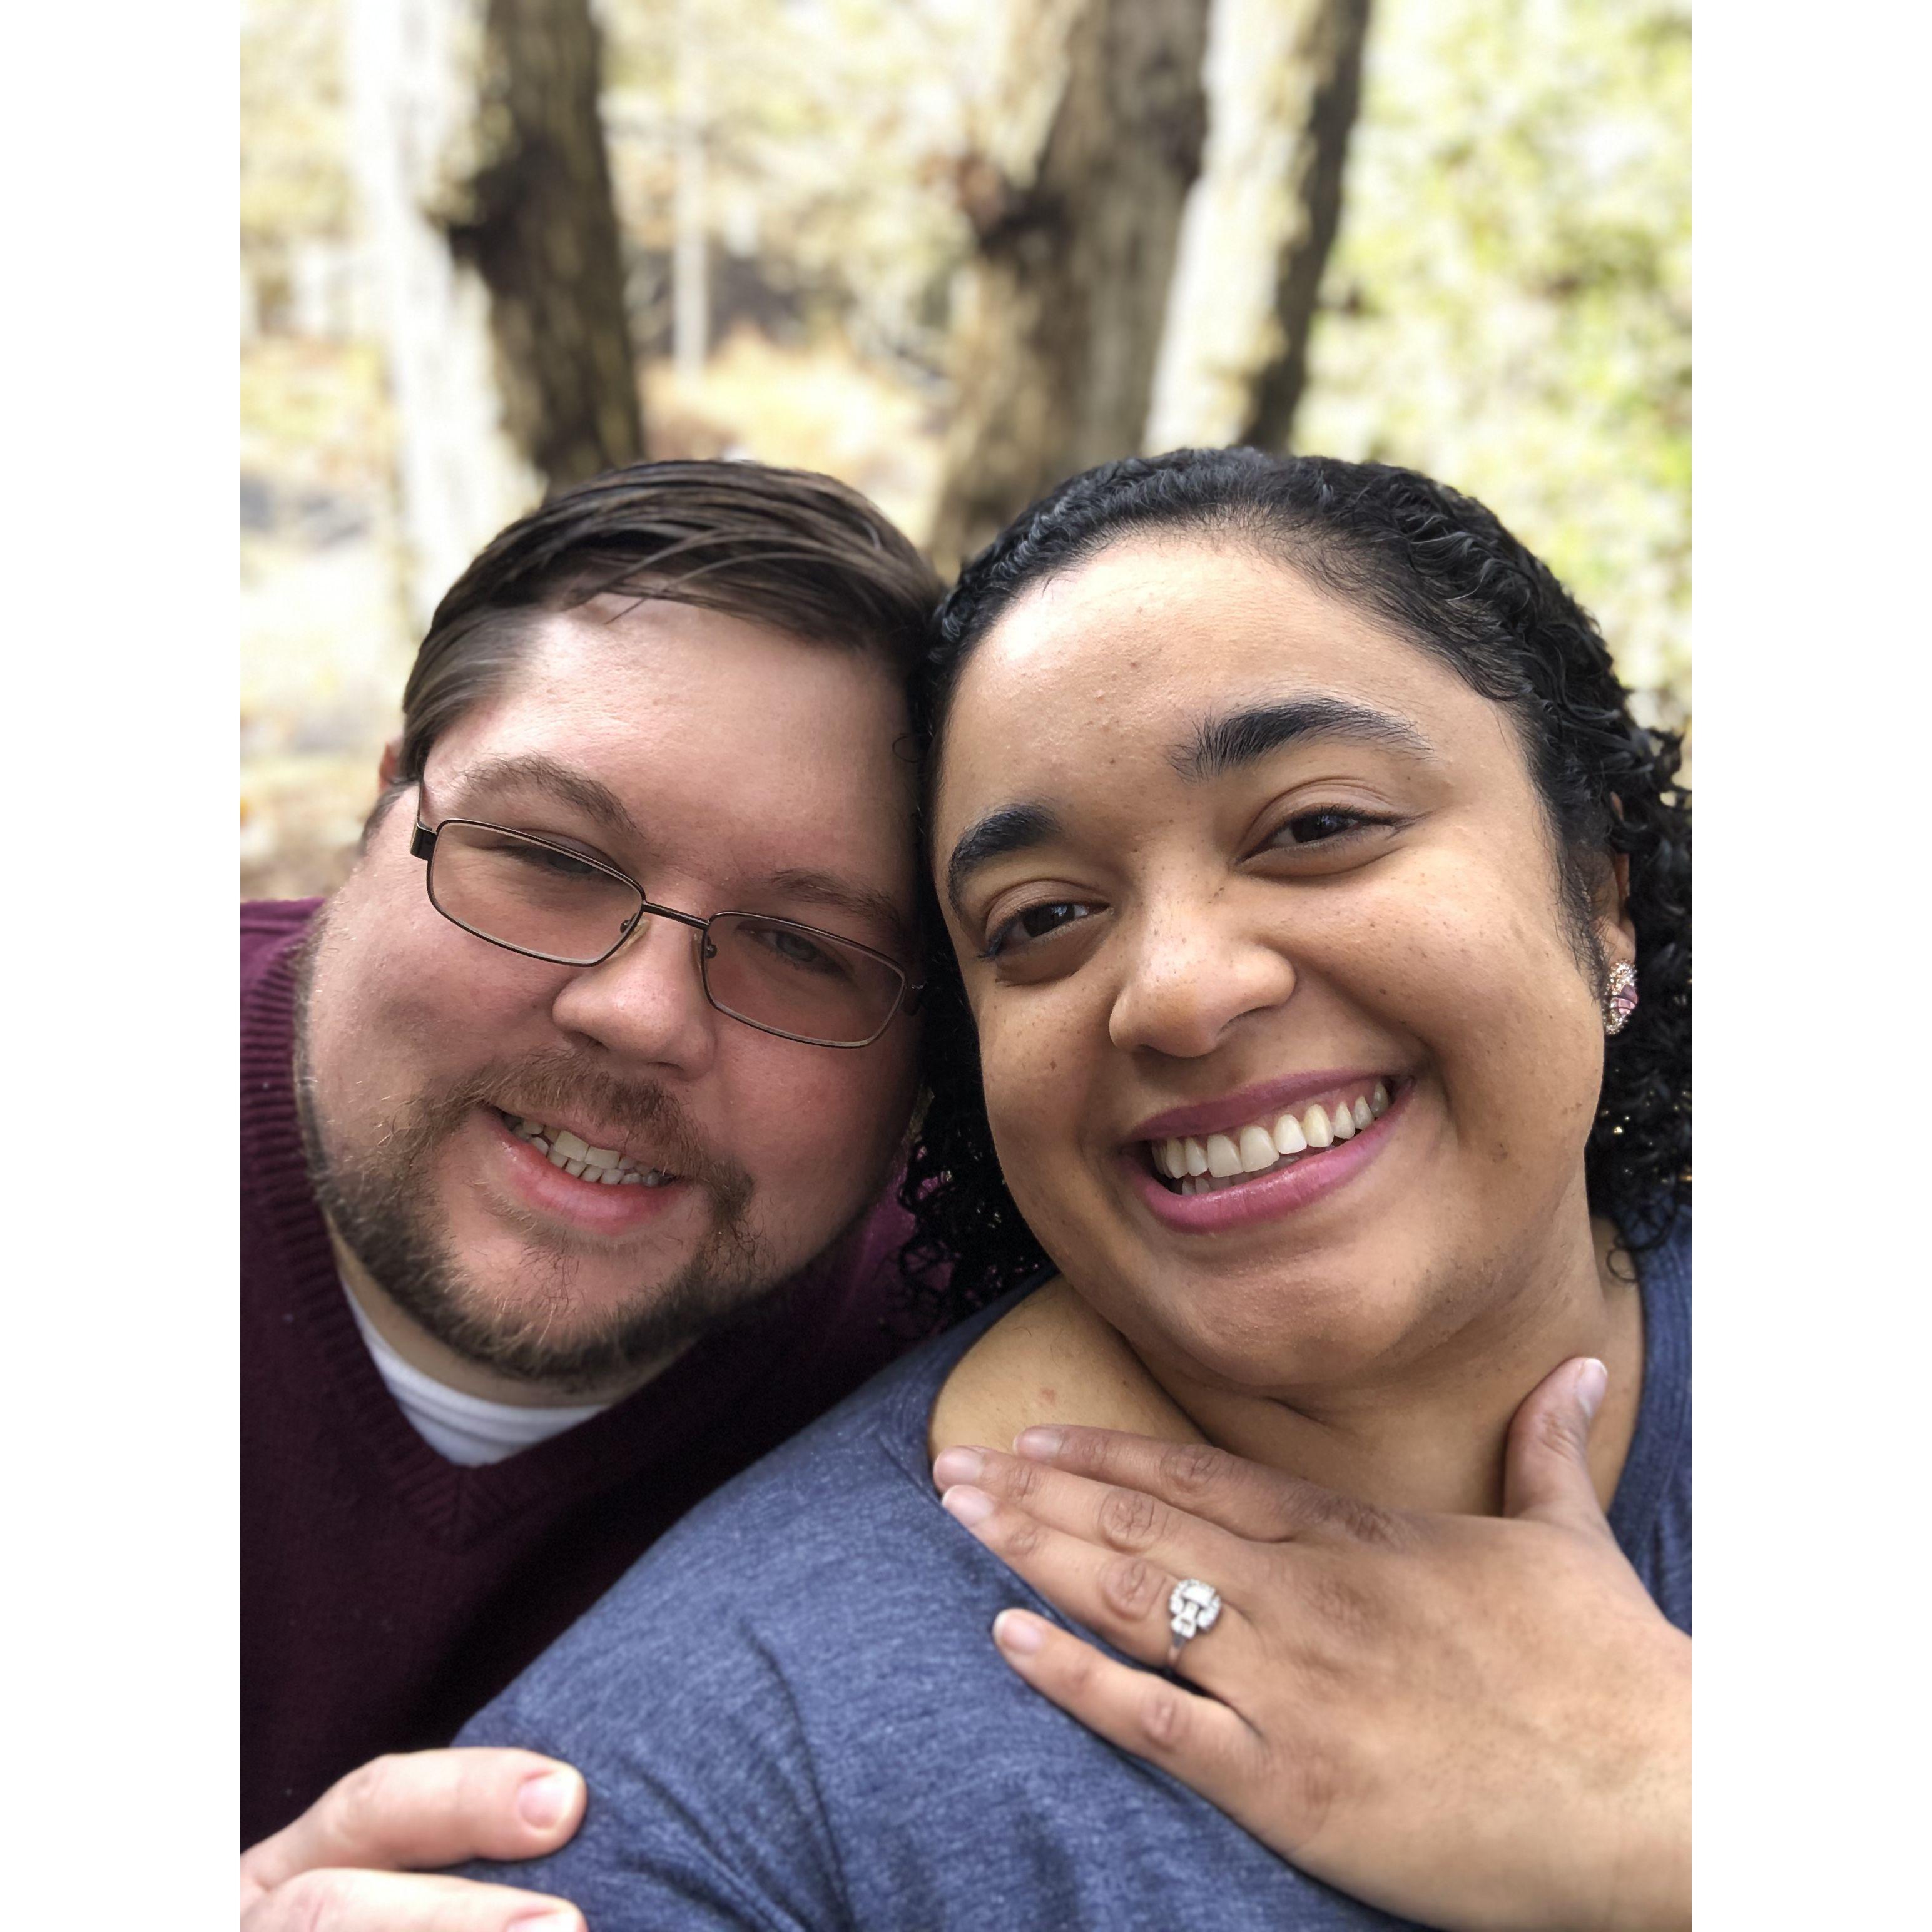 Just got engaged! <3